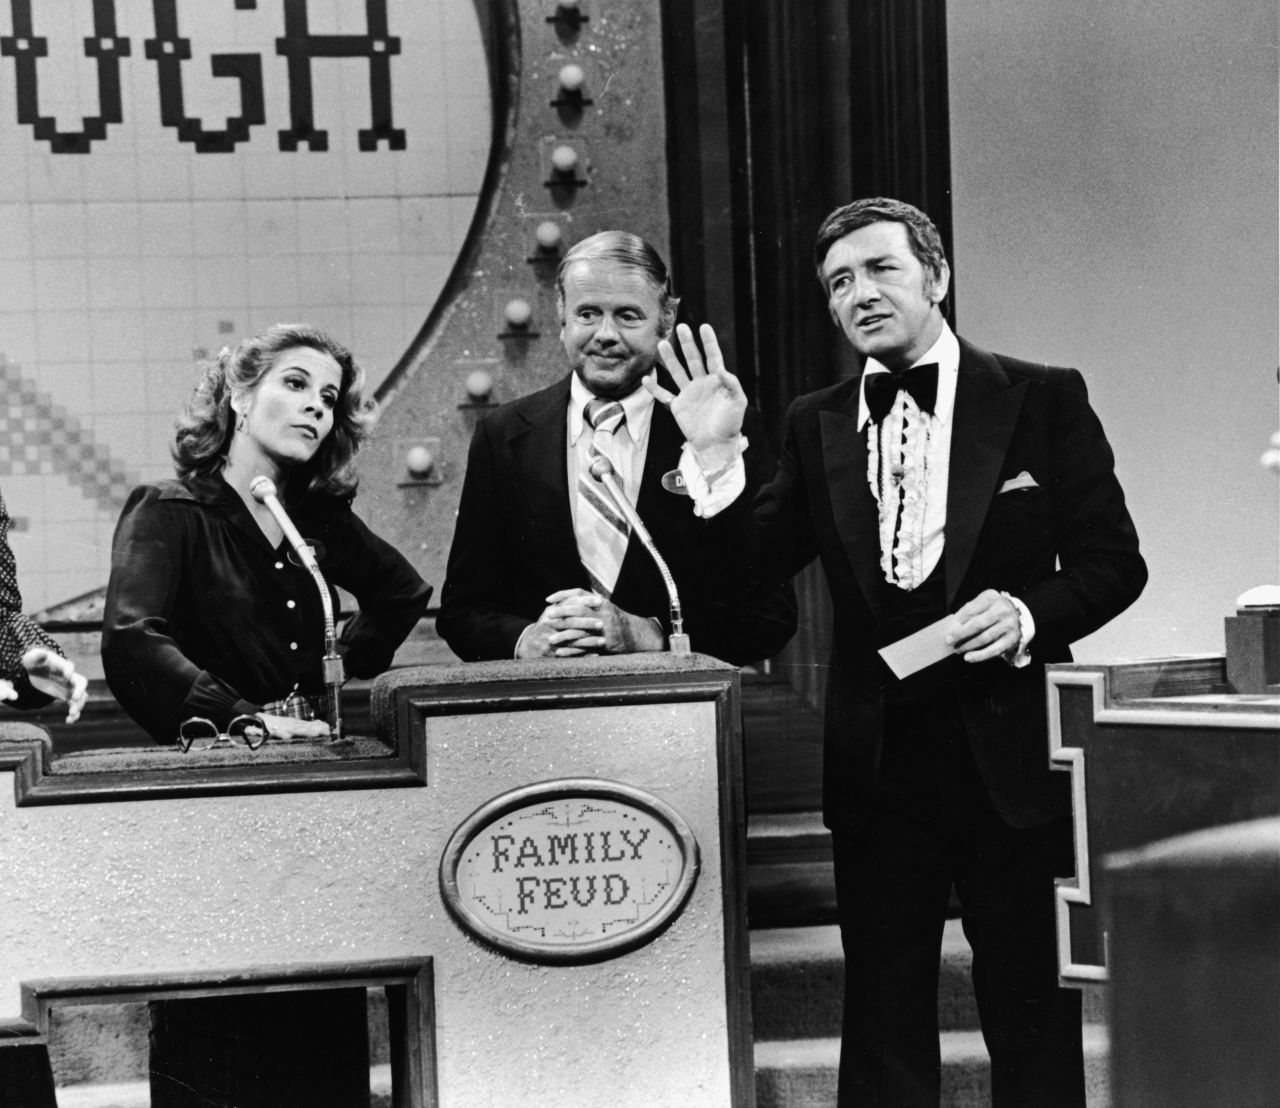 Dawson on an episode of "Family Feud" in April 1978. He hosted the popular game show from 1976 until 1985 and an additional season in 1994-95.